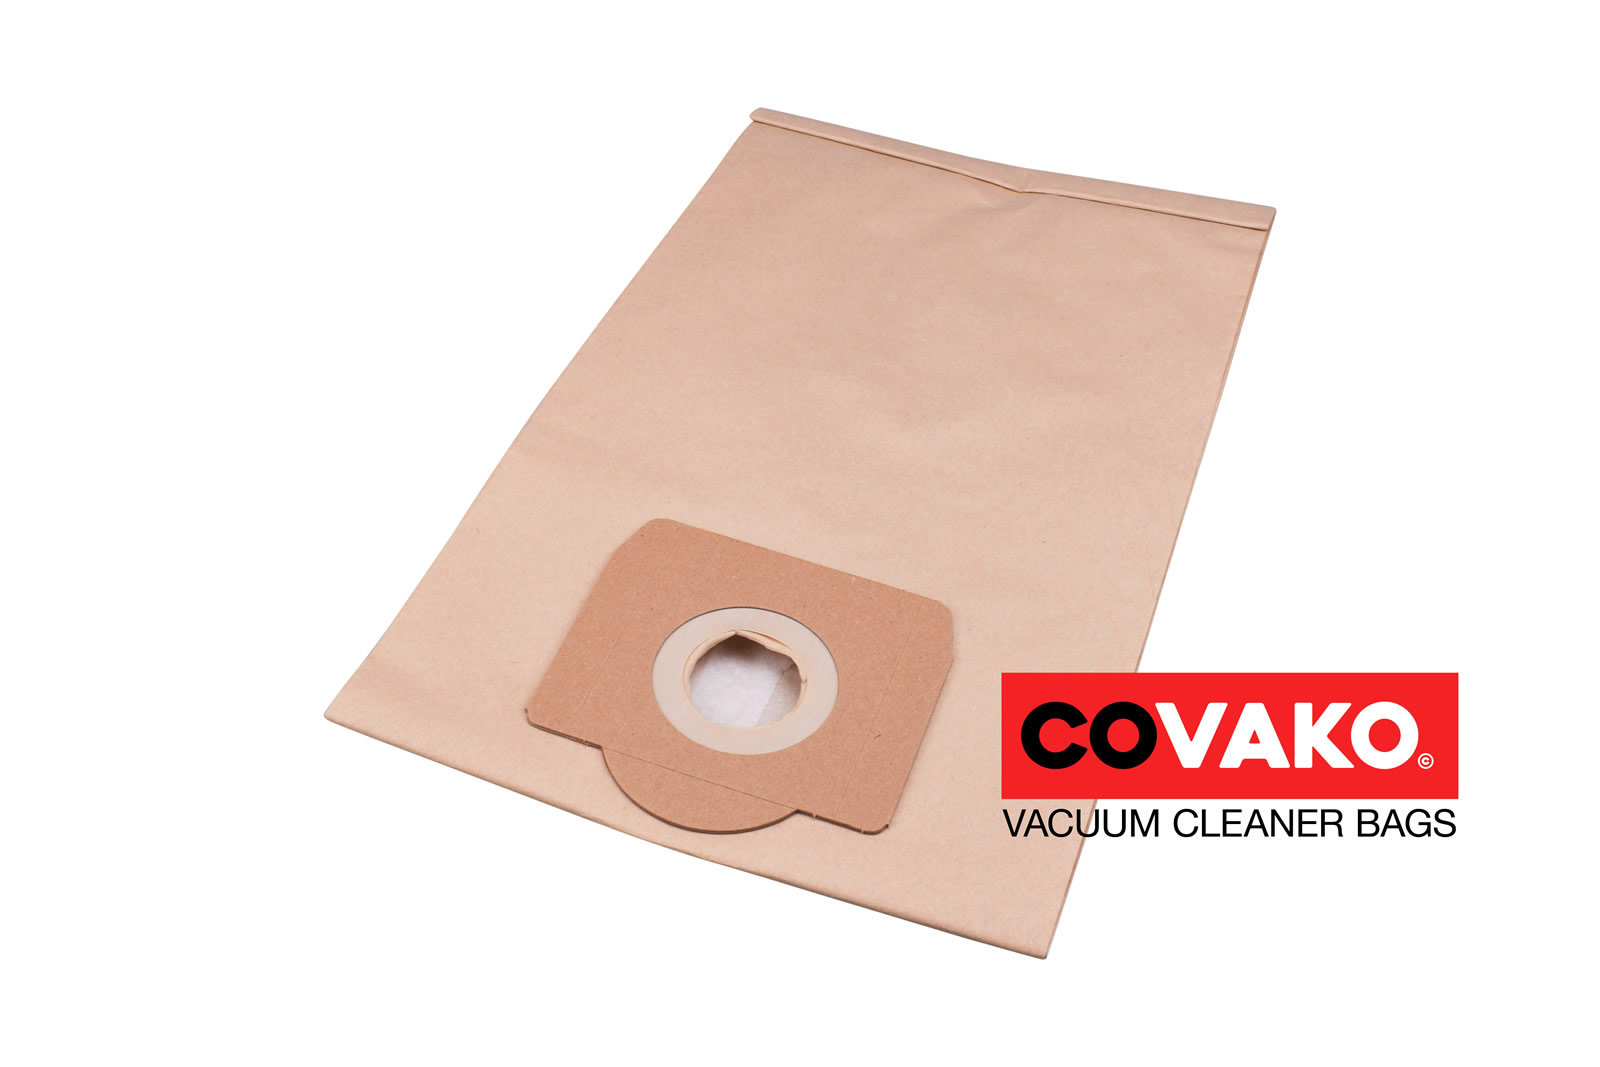 Gansow YP 1400/20 / Paper - Gansow vacuum cleaner bags